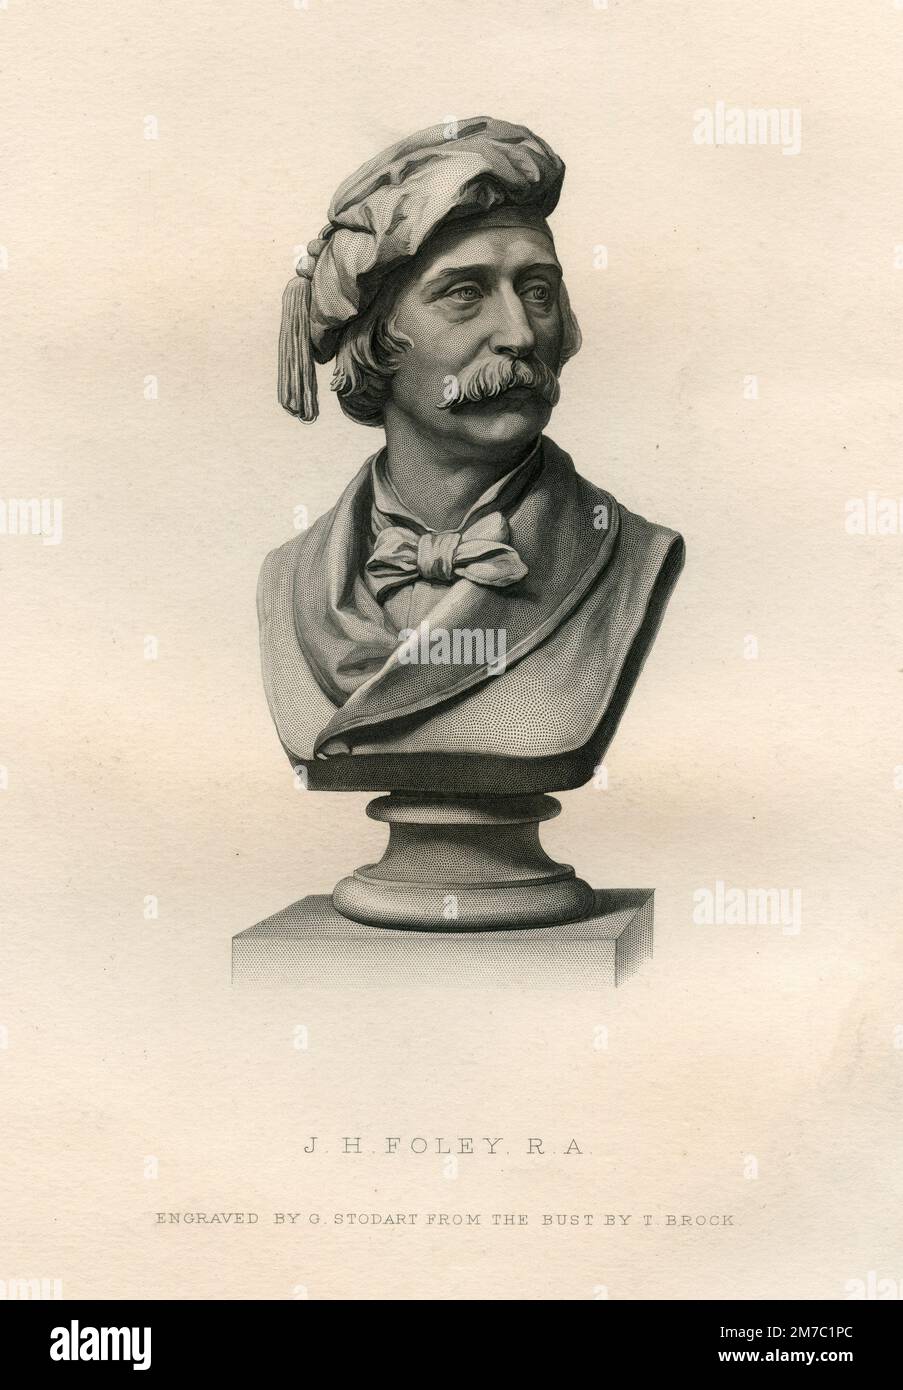 J.H. Foley, print engraved by G. Stodart from the bust by T. Brock, UK 1877 Stock Photo